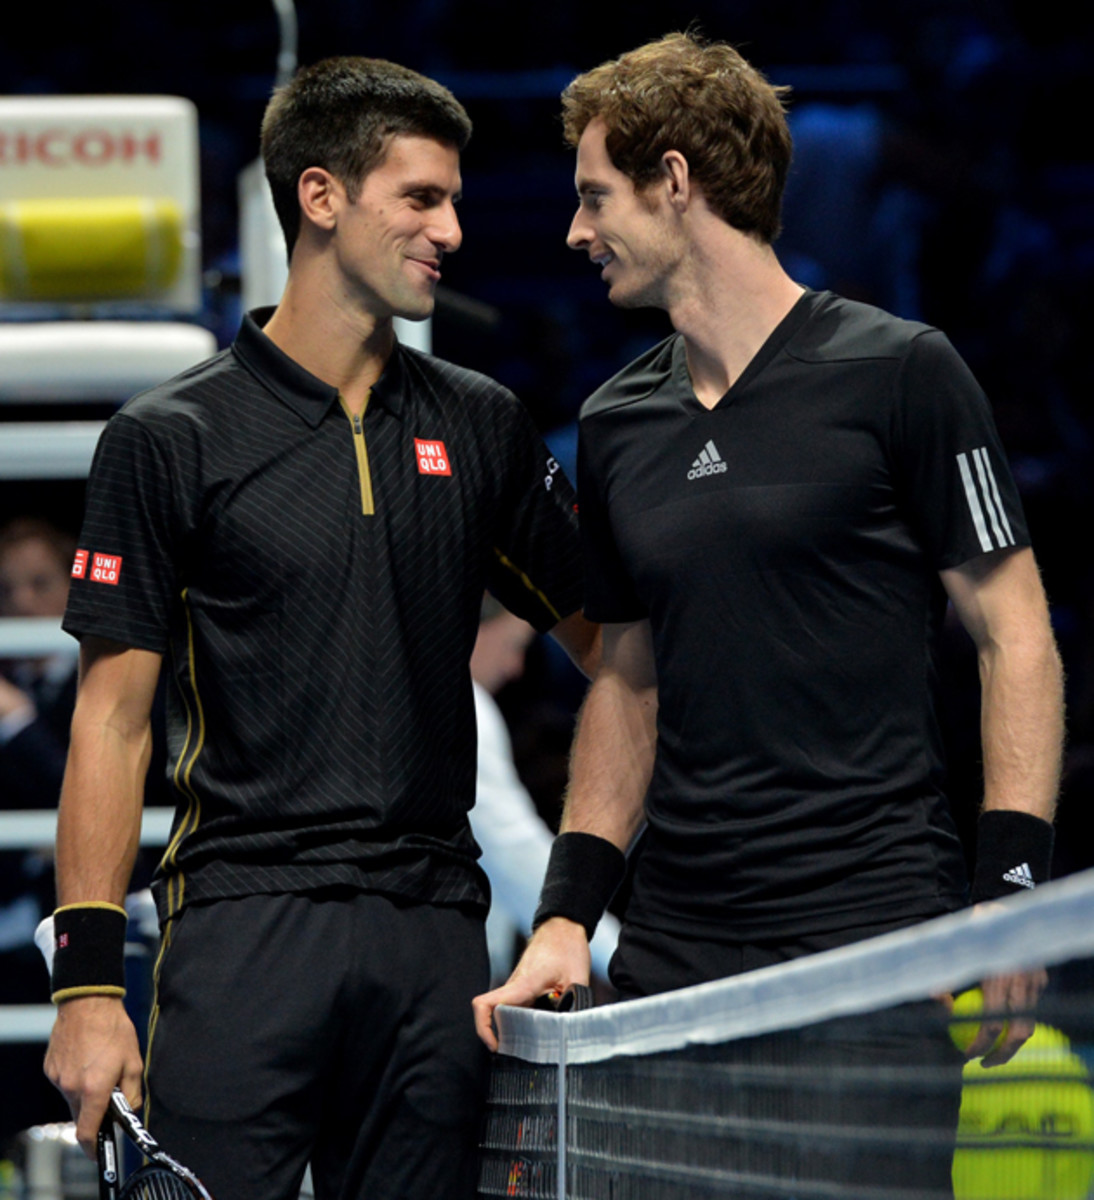 Djokovic and Murray share a moment before their exhibition match after Federer withdrew from the ATP Finals title match.